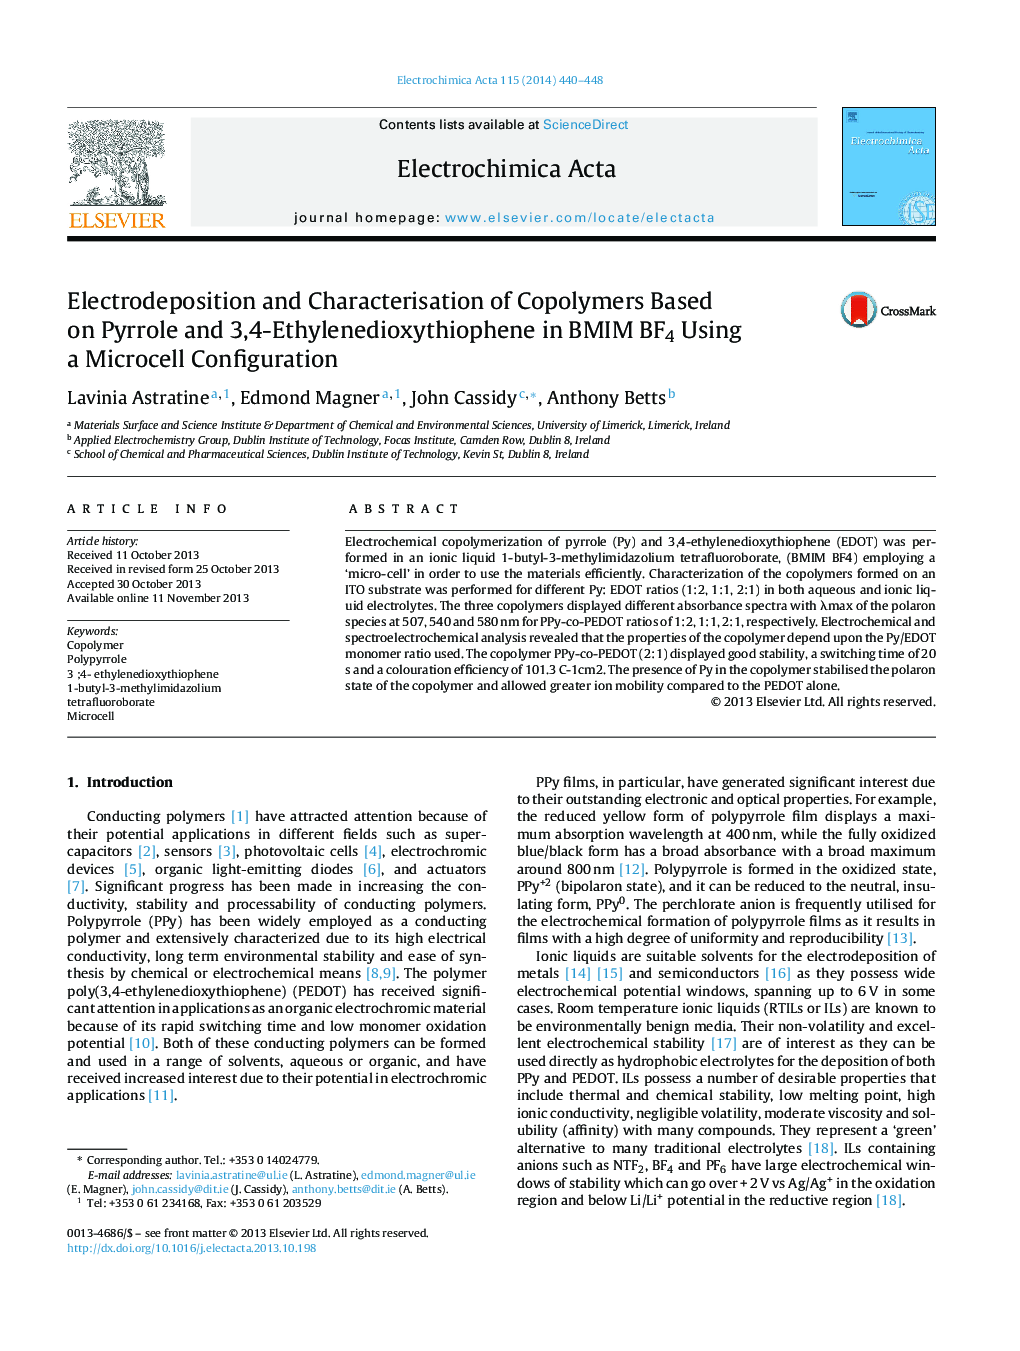 Electrodeposition and Characterisation of Copolymers Based on Pyrrole and 3,4-Ethylenedioxythiophene in BMIM BF4 Using a Microcell Configuration